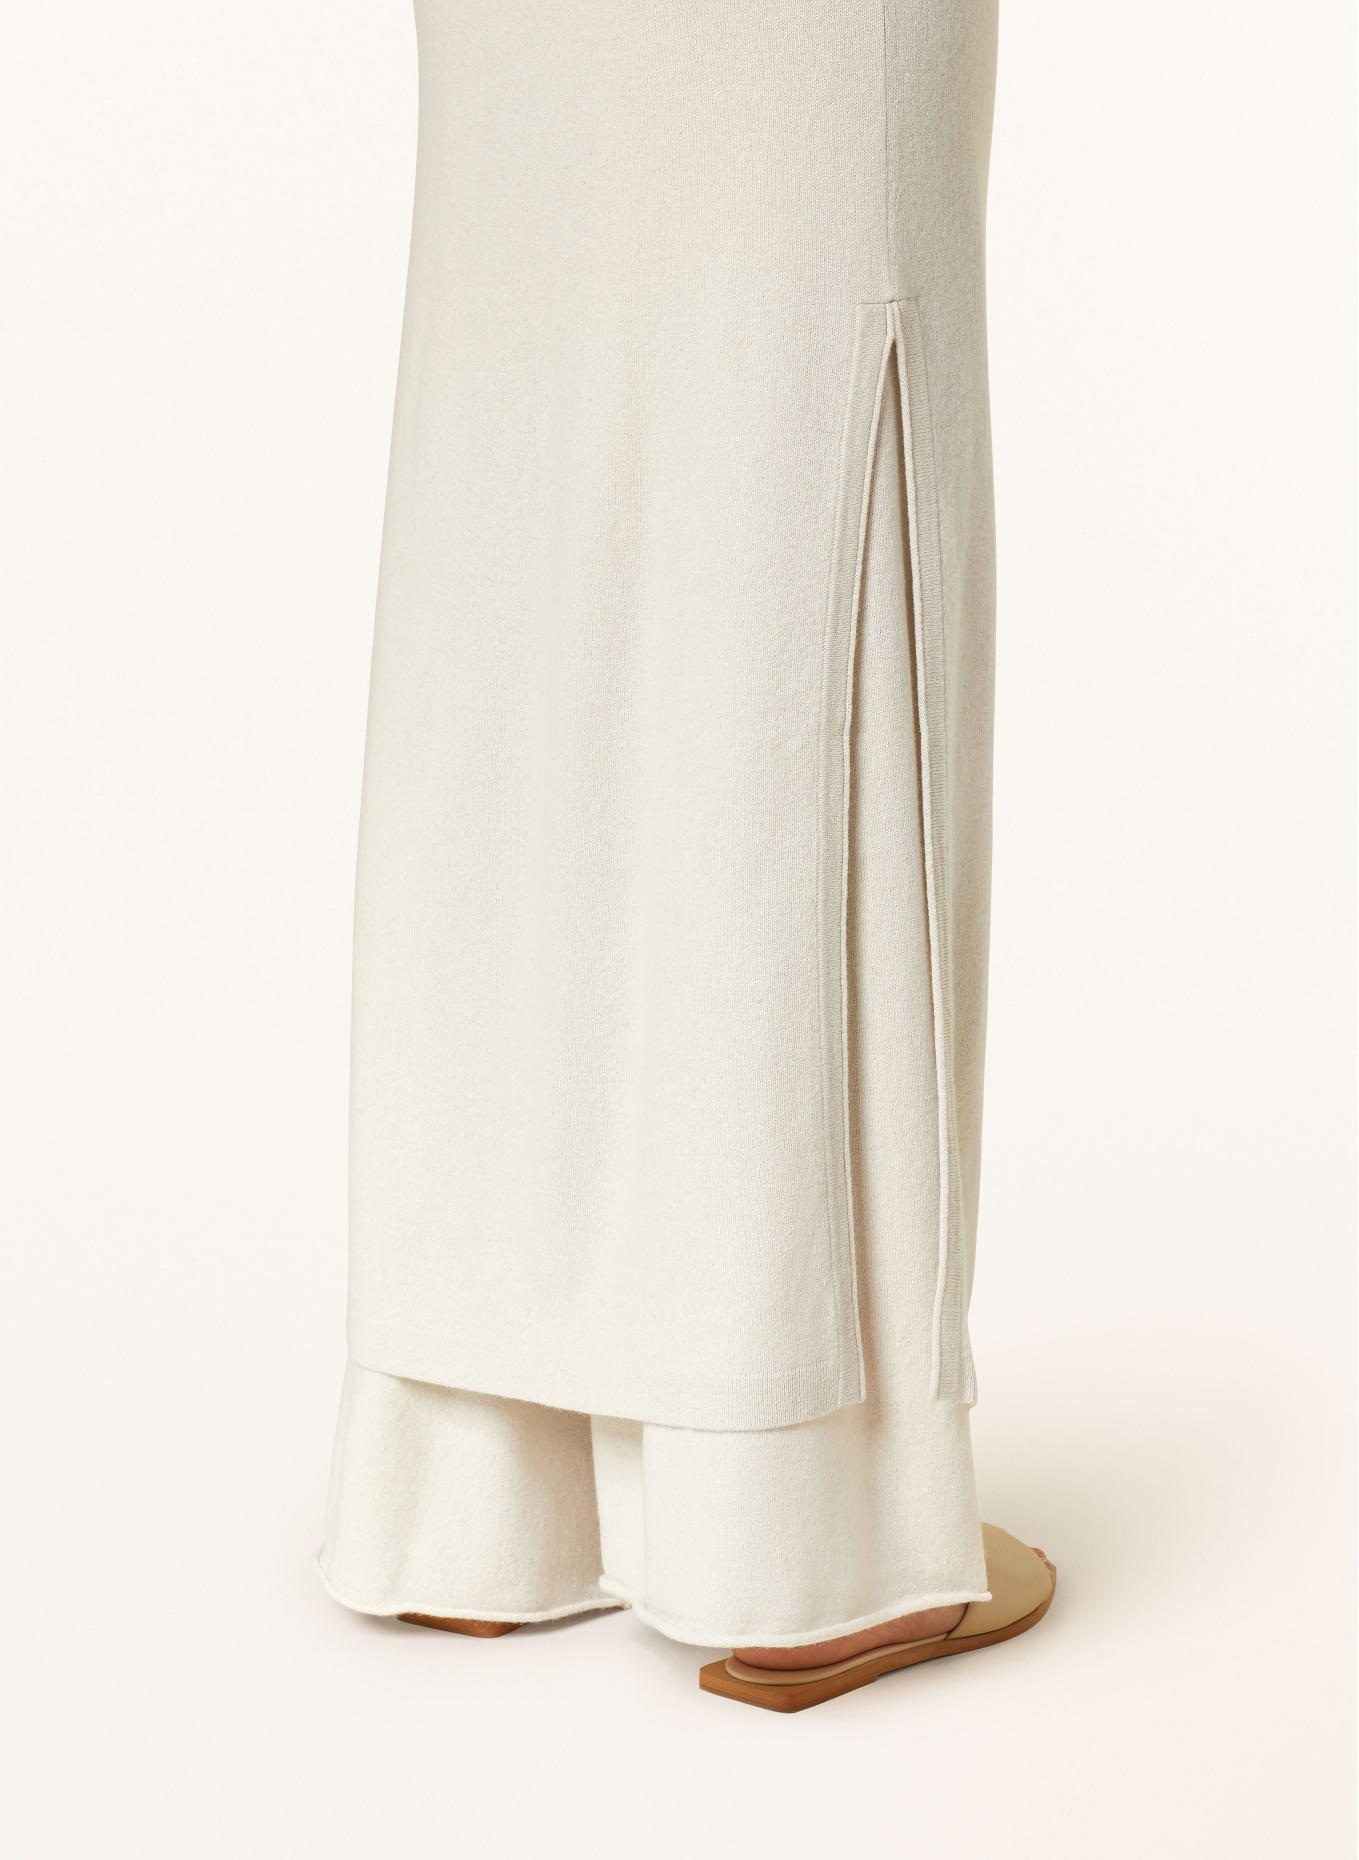 LISA YANG Knit dress made of cashmere with glitter thread, Color: CREAM (Image 4)